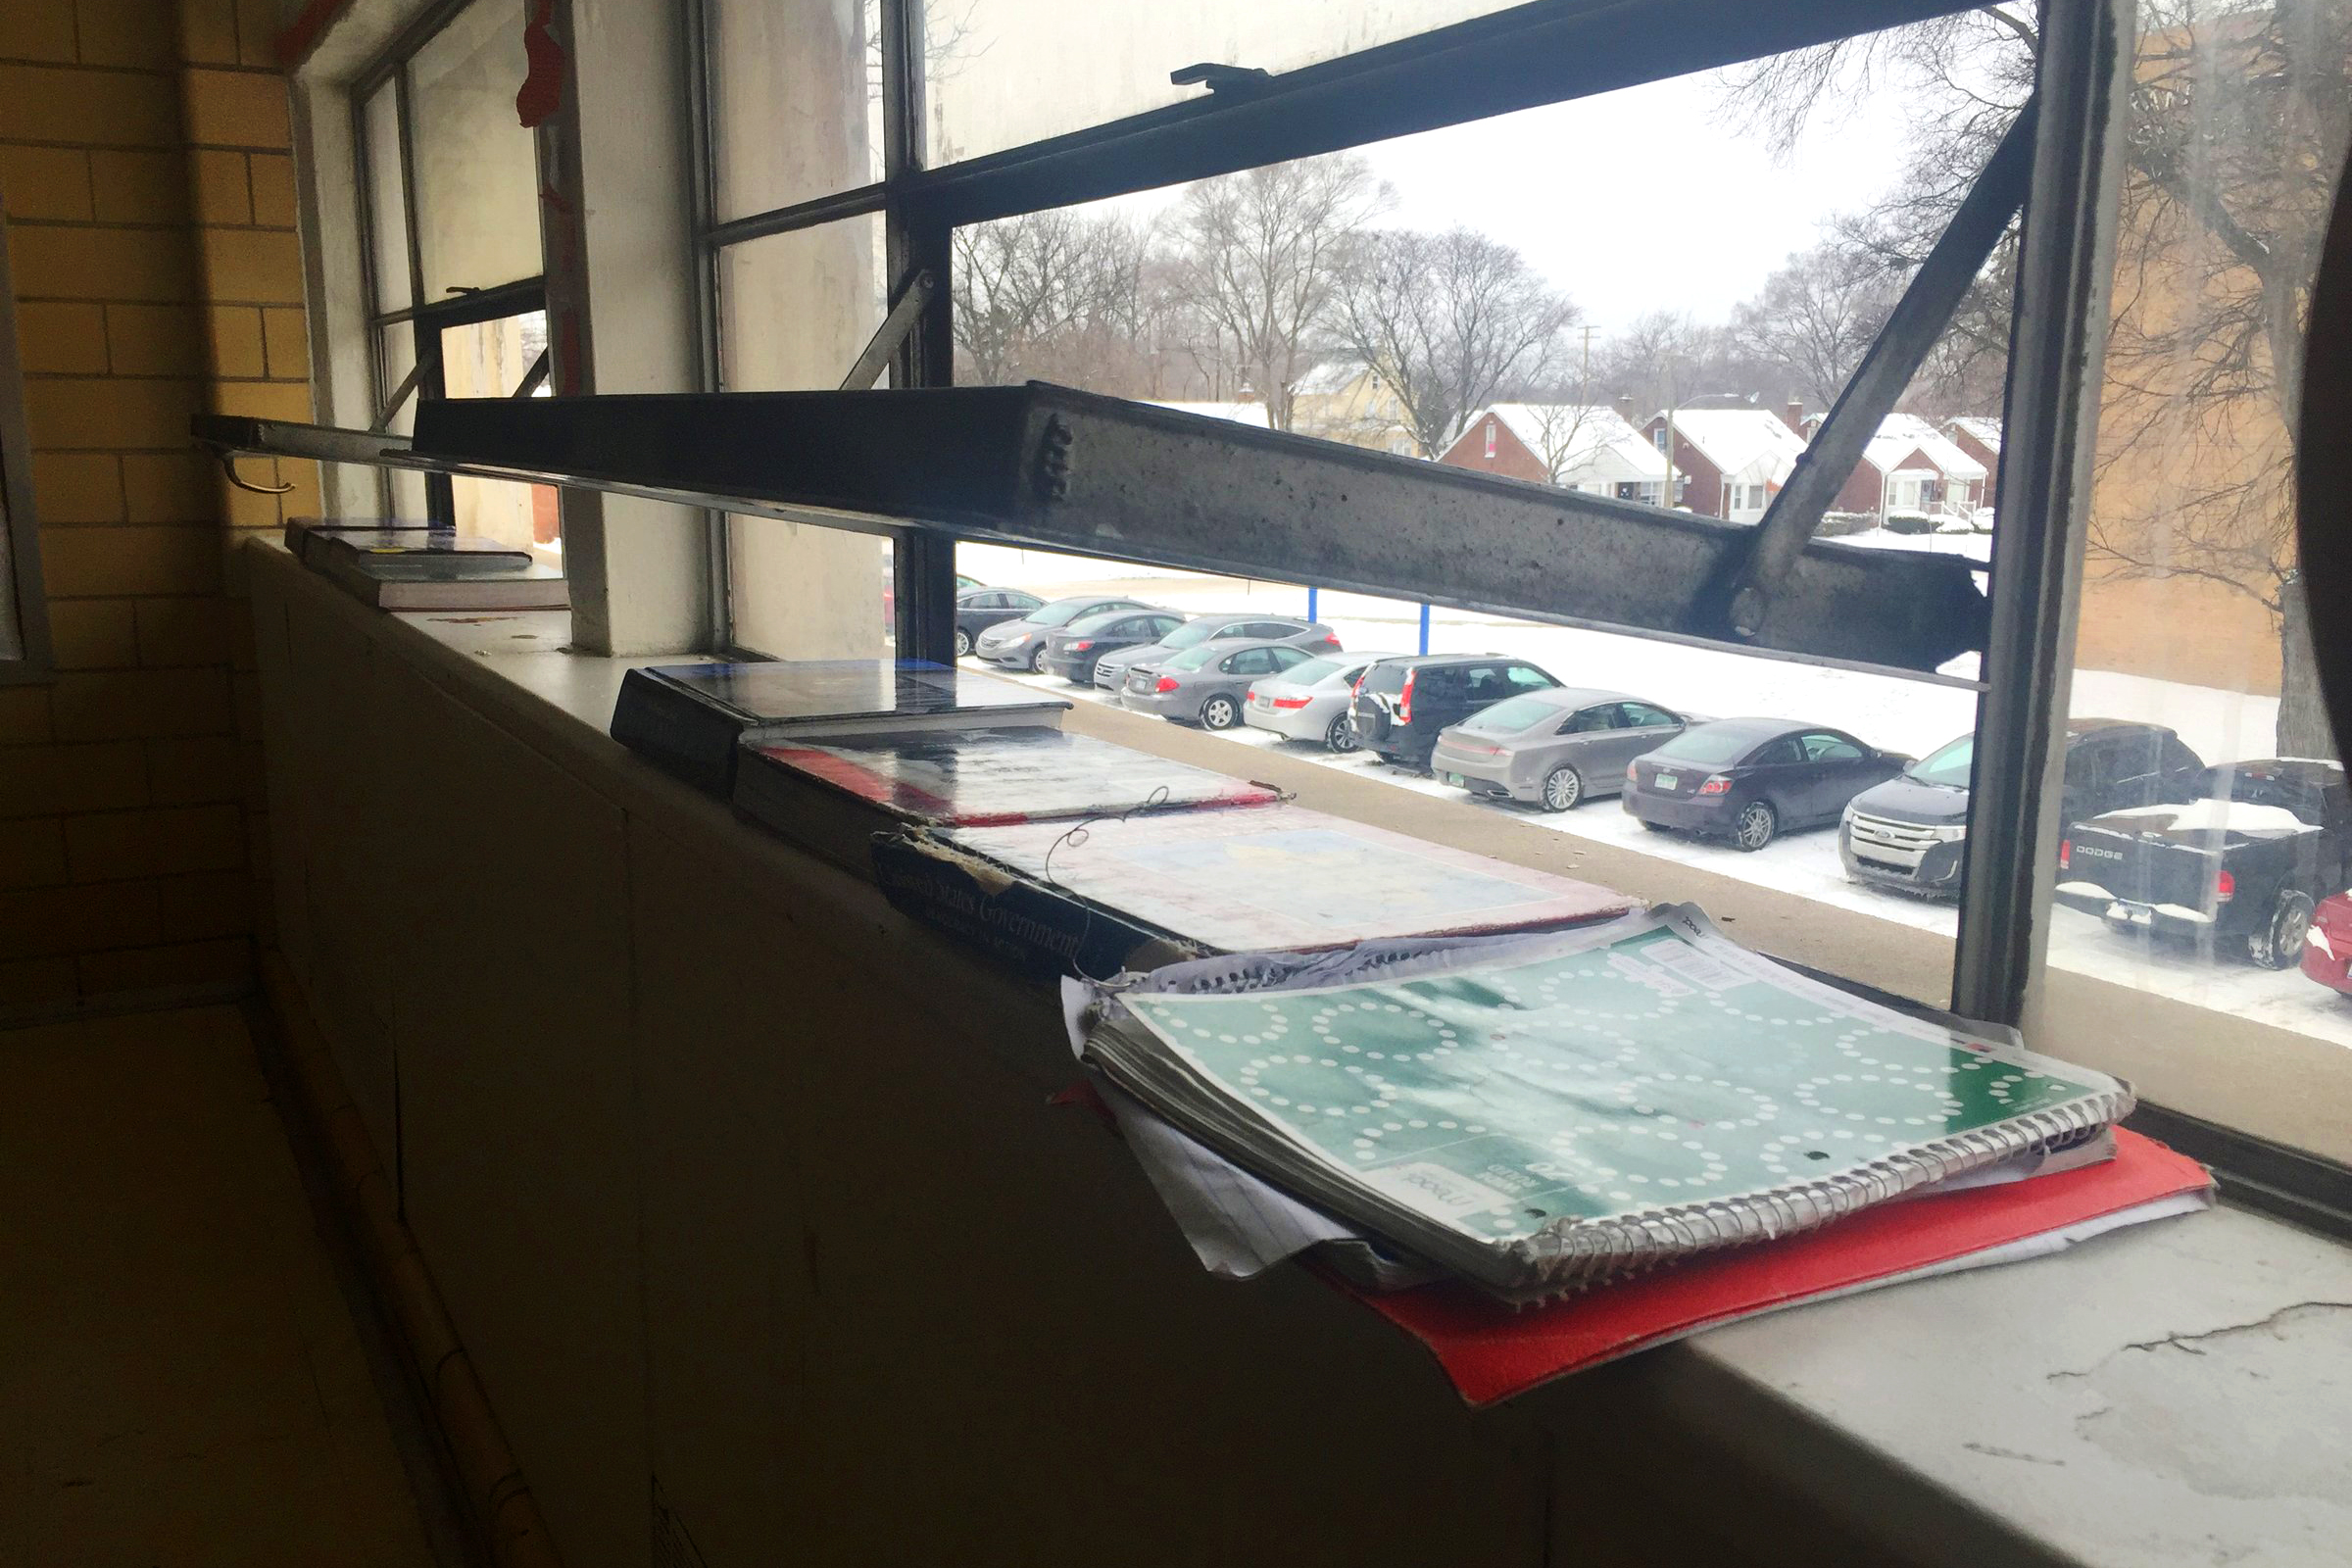 Windows are open and books cover heating vents to keep excessive heat from raising classroom temperatures at Cody Complex, part of the Detroit Public Schools, on Detroit's west side on Jan. 14, 2016. The school's aging boilers need work to regulate the temperature, but the district can't afford to fix them. (John Wisely—Detroit Free Press/Zuma)